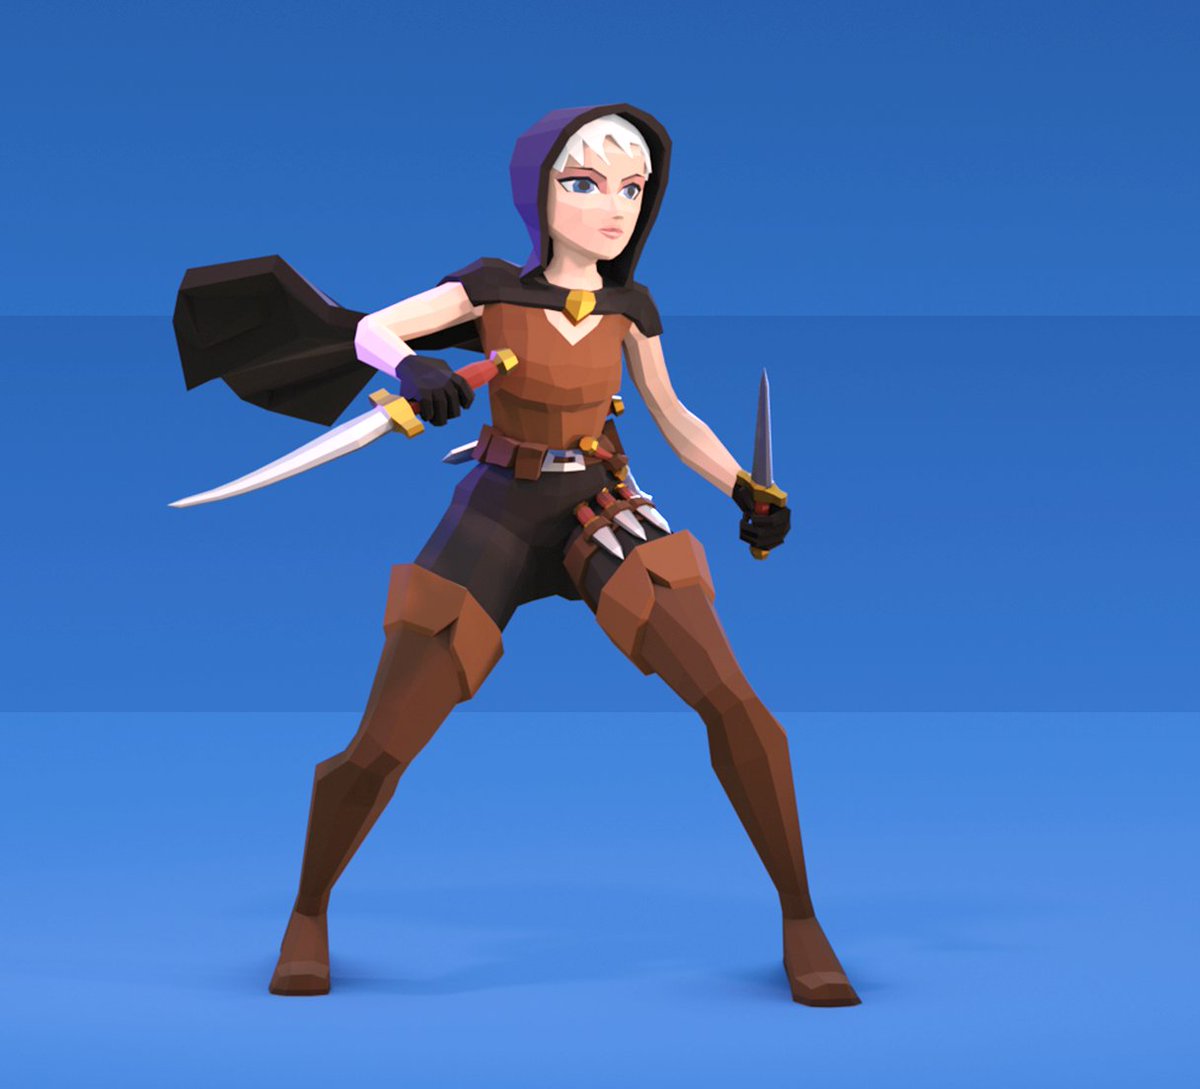 Made a fun rogue 3d game character in Blender. Find out how - youtu.be/BJyFd0uGwFk